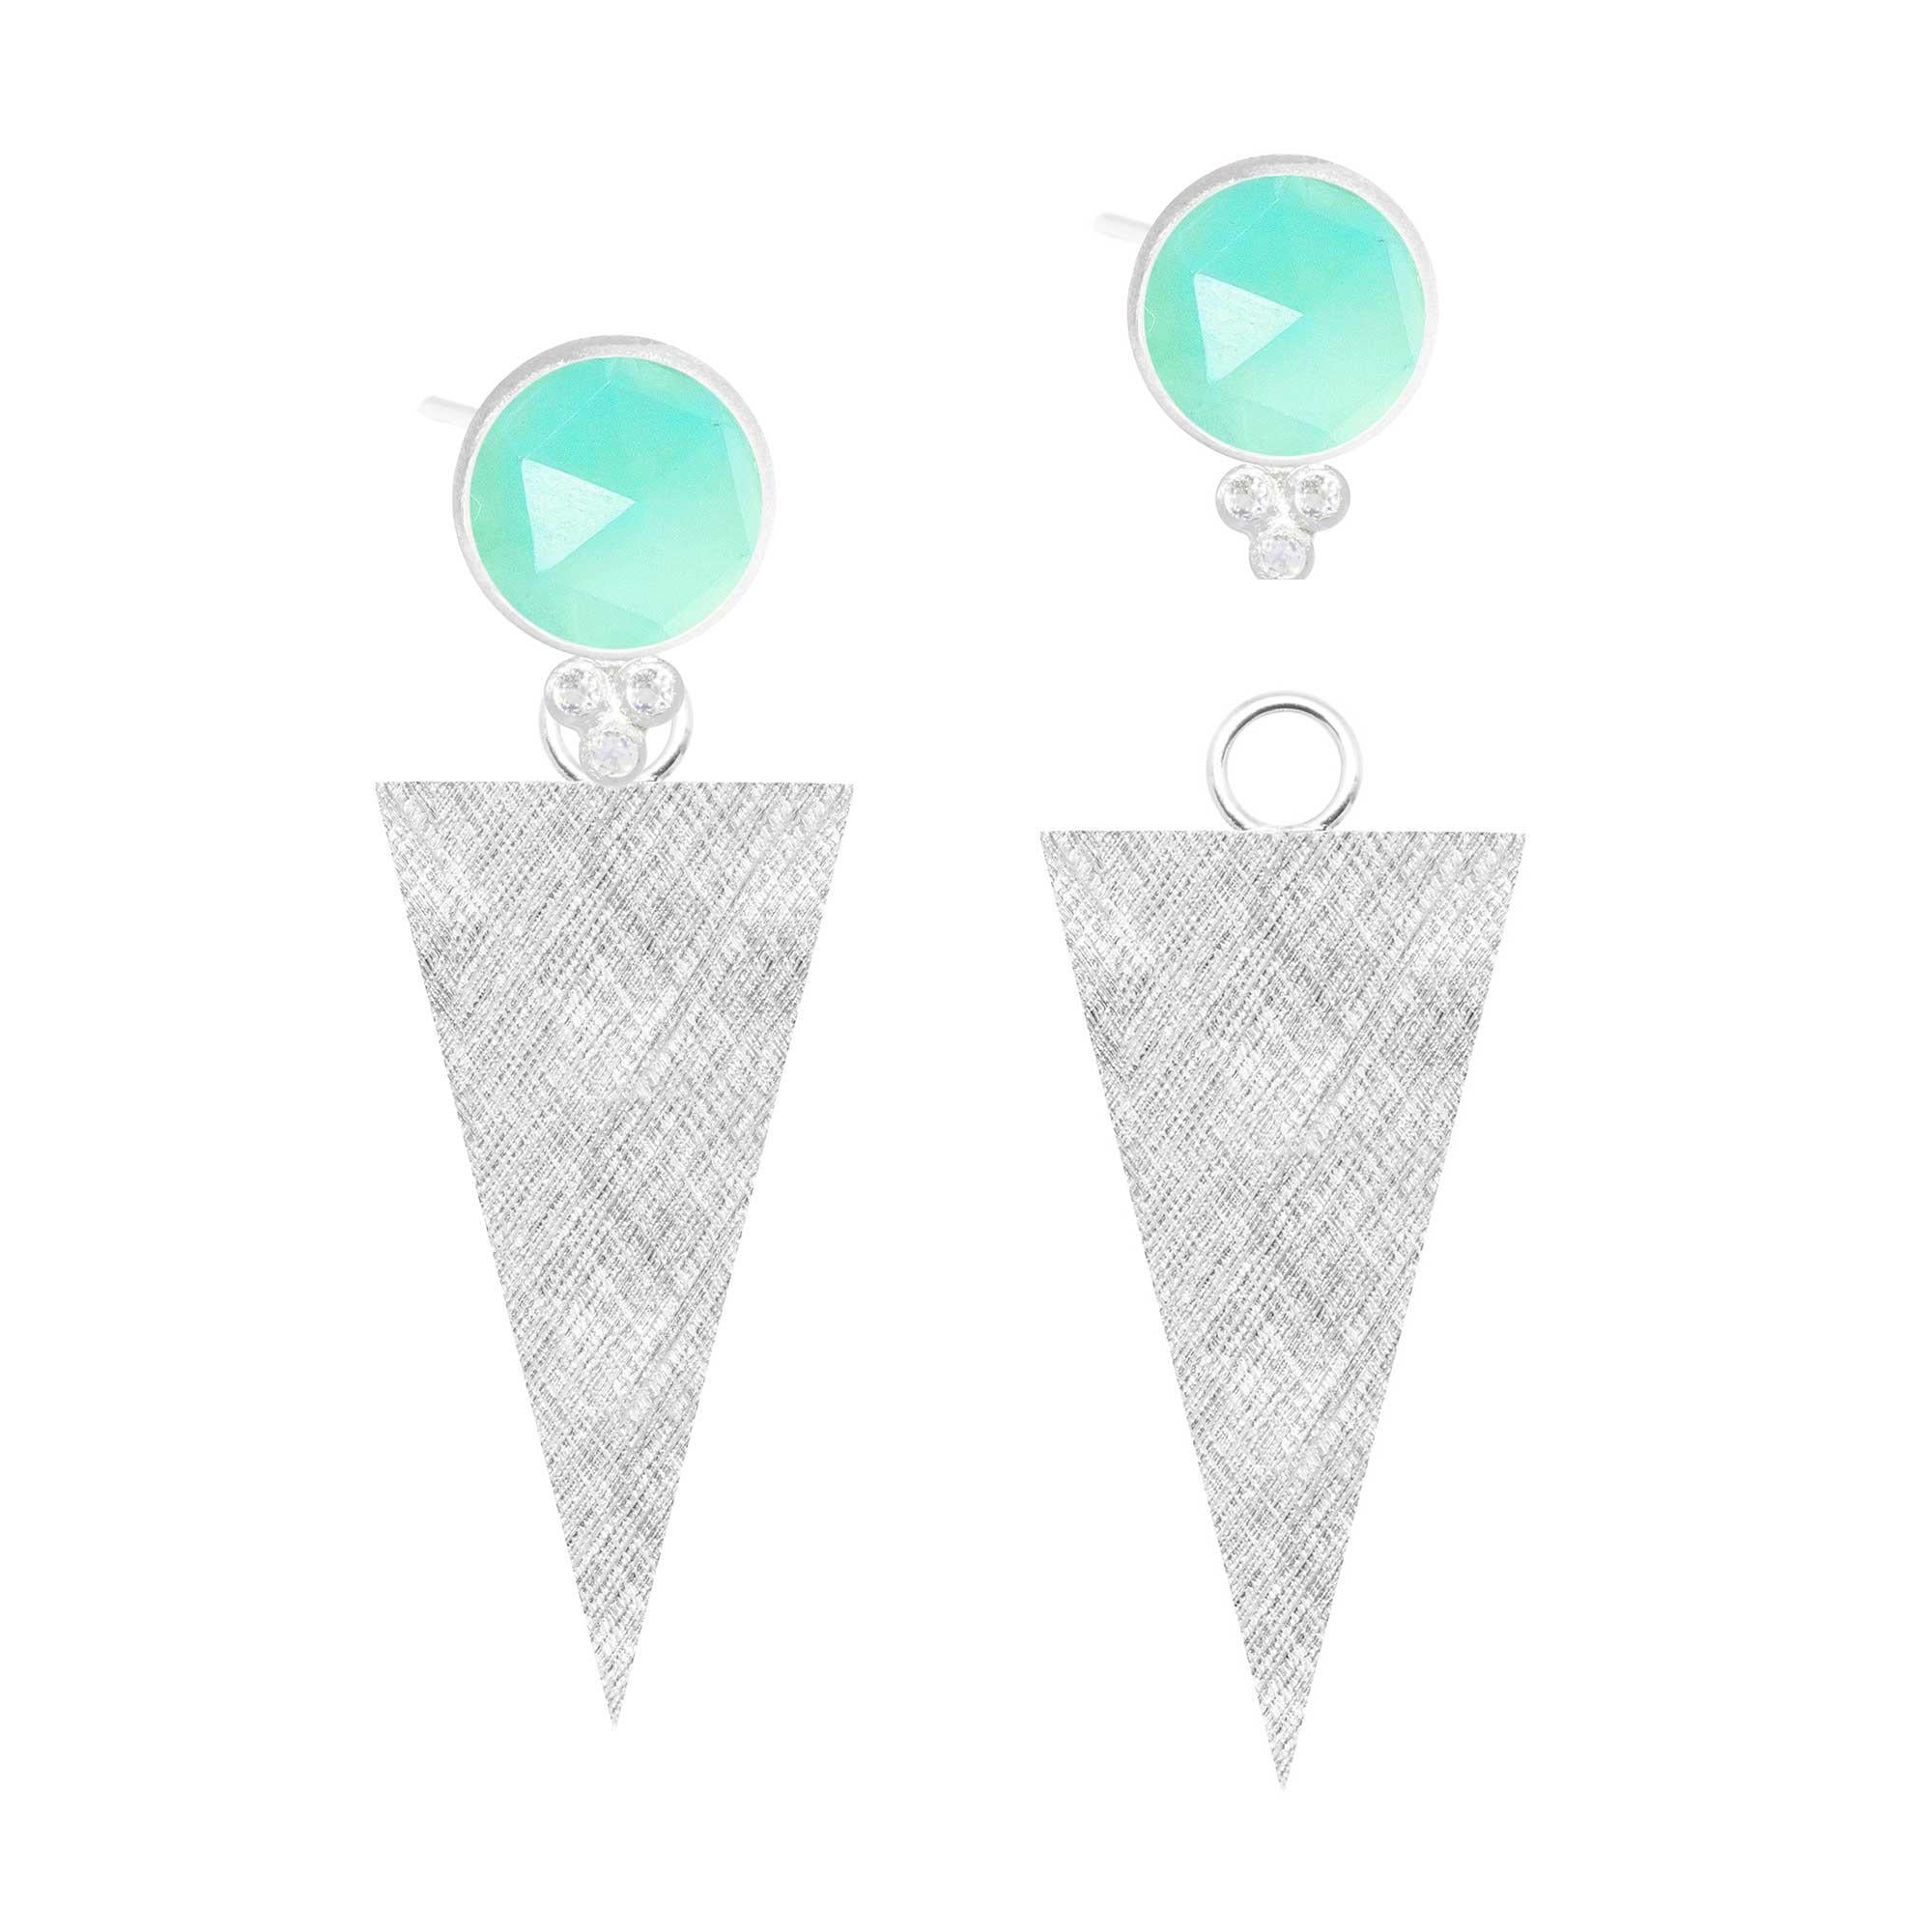 A Nina Nguyen classic: Our Chloe Chrysoprase Silver Studs are designed with faceted chrysoprases rimmed in silver, and accented with gemstones for some extra sparkle.

Metal: Sterling Silver
Stone carat: 7
Stone size: 10mm

About the